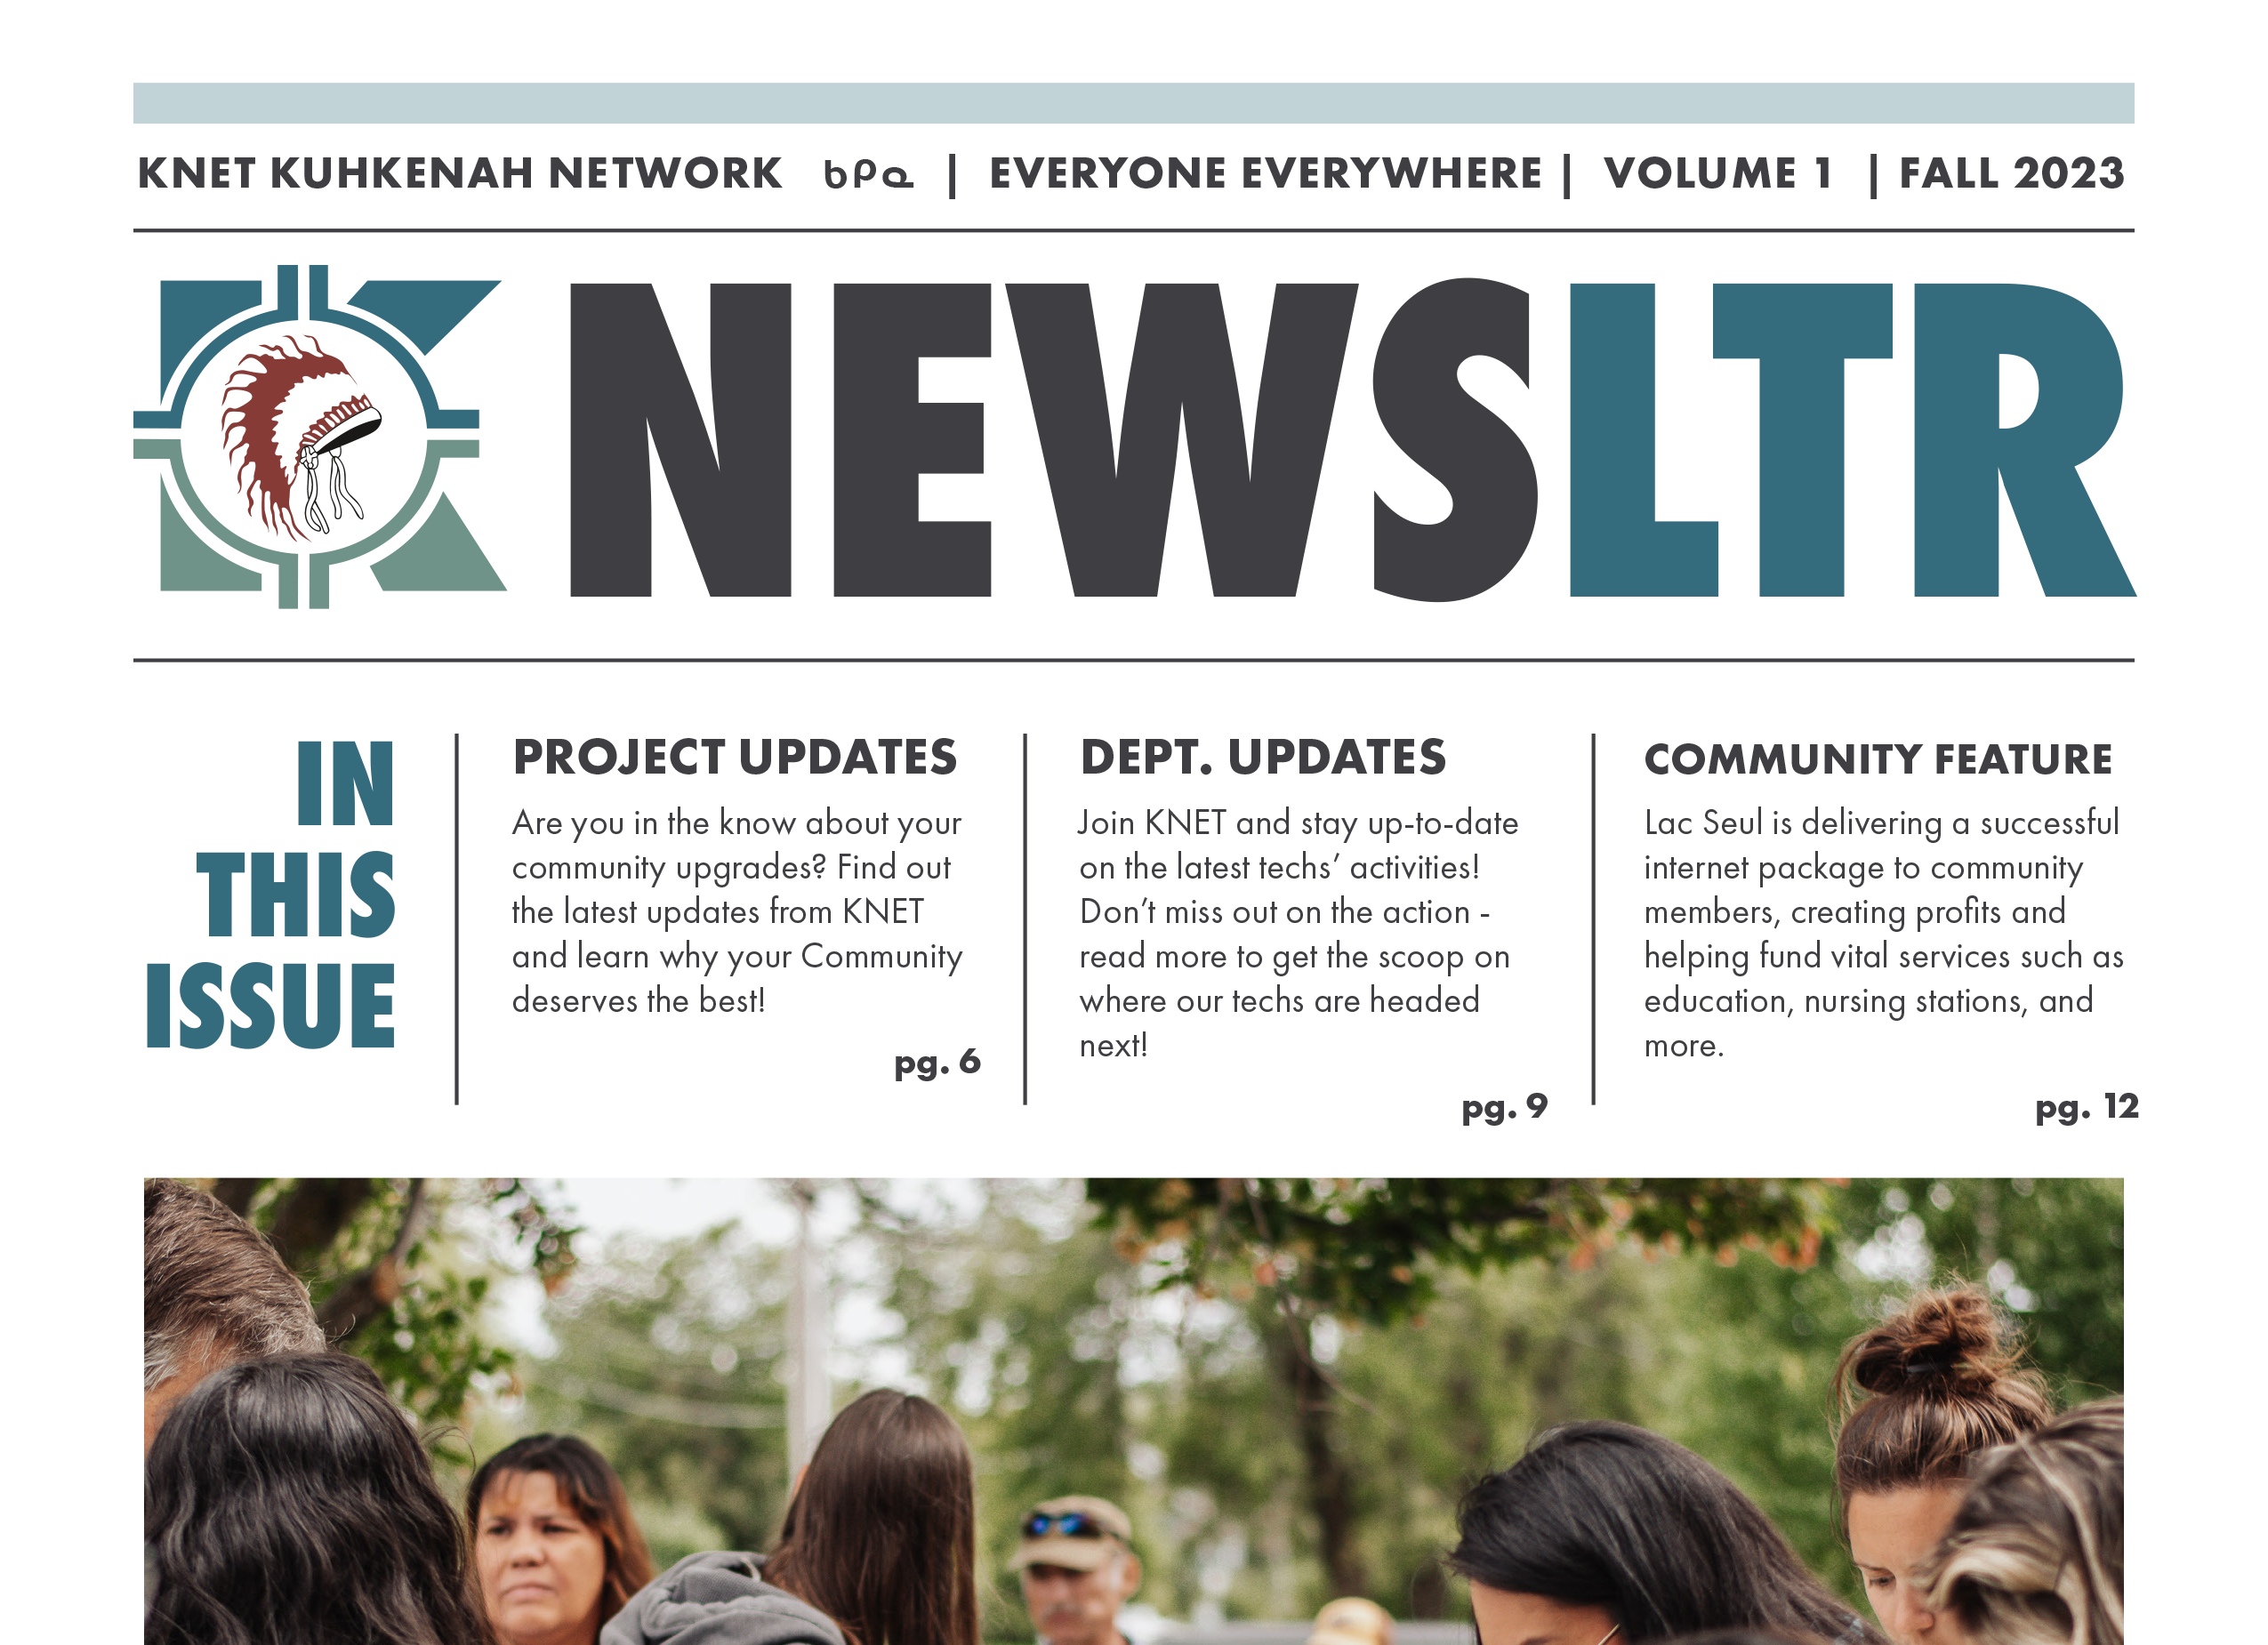 The KNET Newsletter is Out!